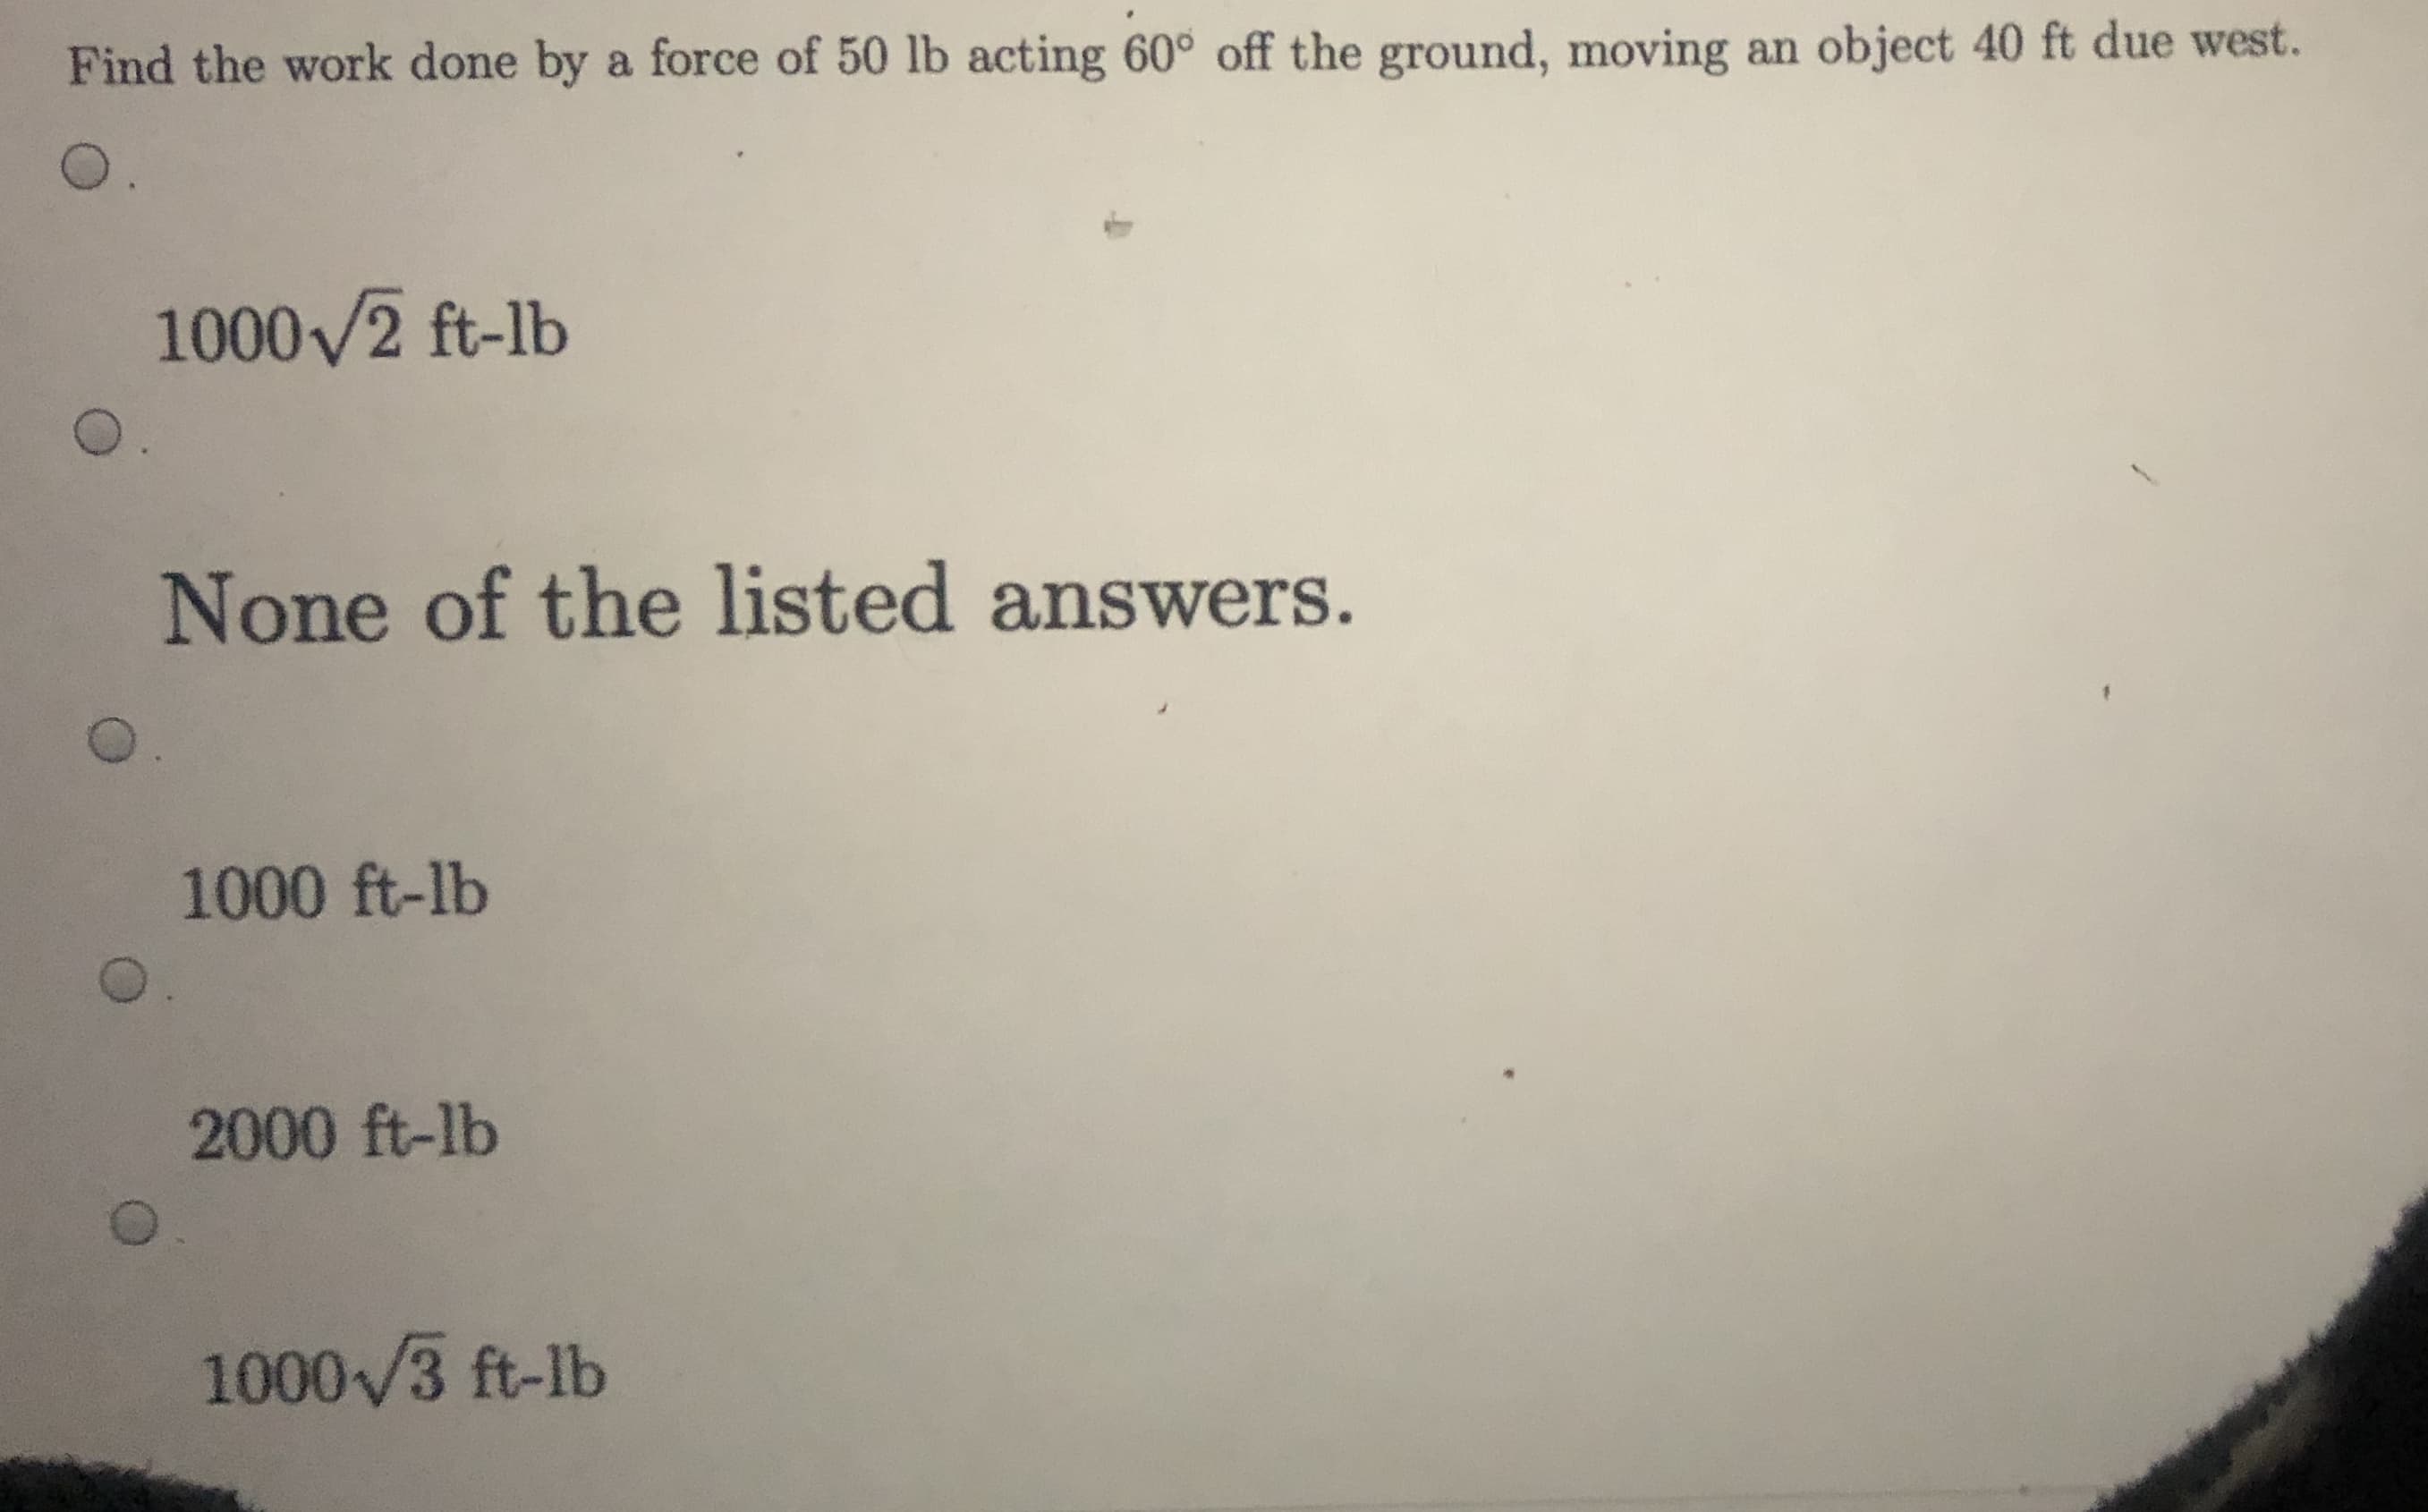 Find the work done by a force of 50 lb acting 60° off the ground, moving an object 40 ft due west.
O.
1000/2 ft-lb
None of the listed answers.
1000 ft-lb
2000 ft-lb
1000/3 ft-lb
